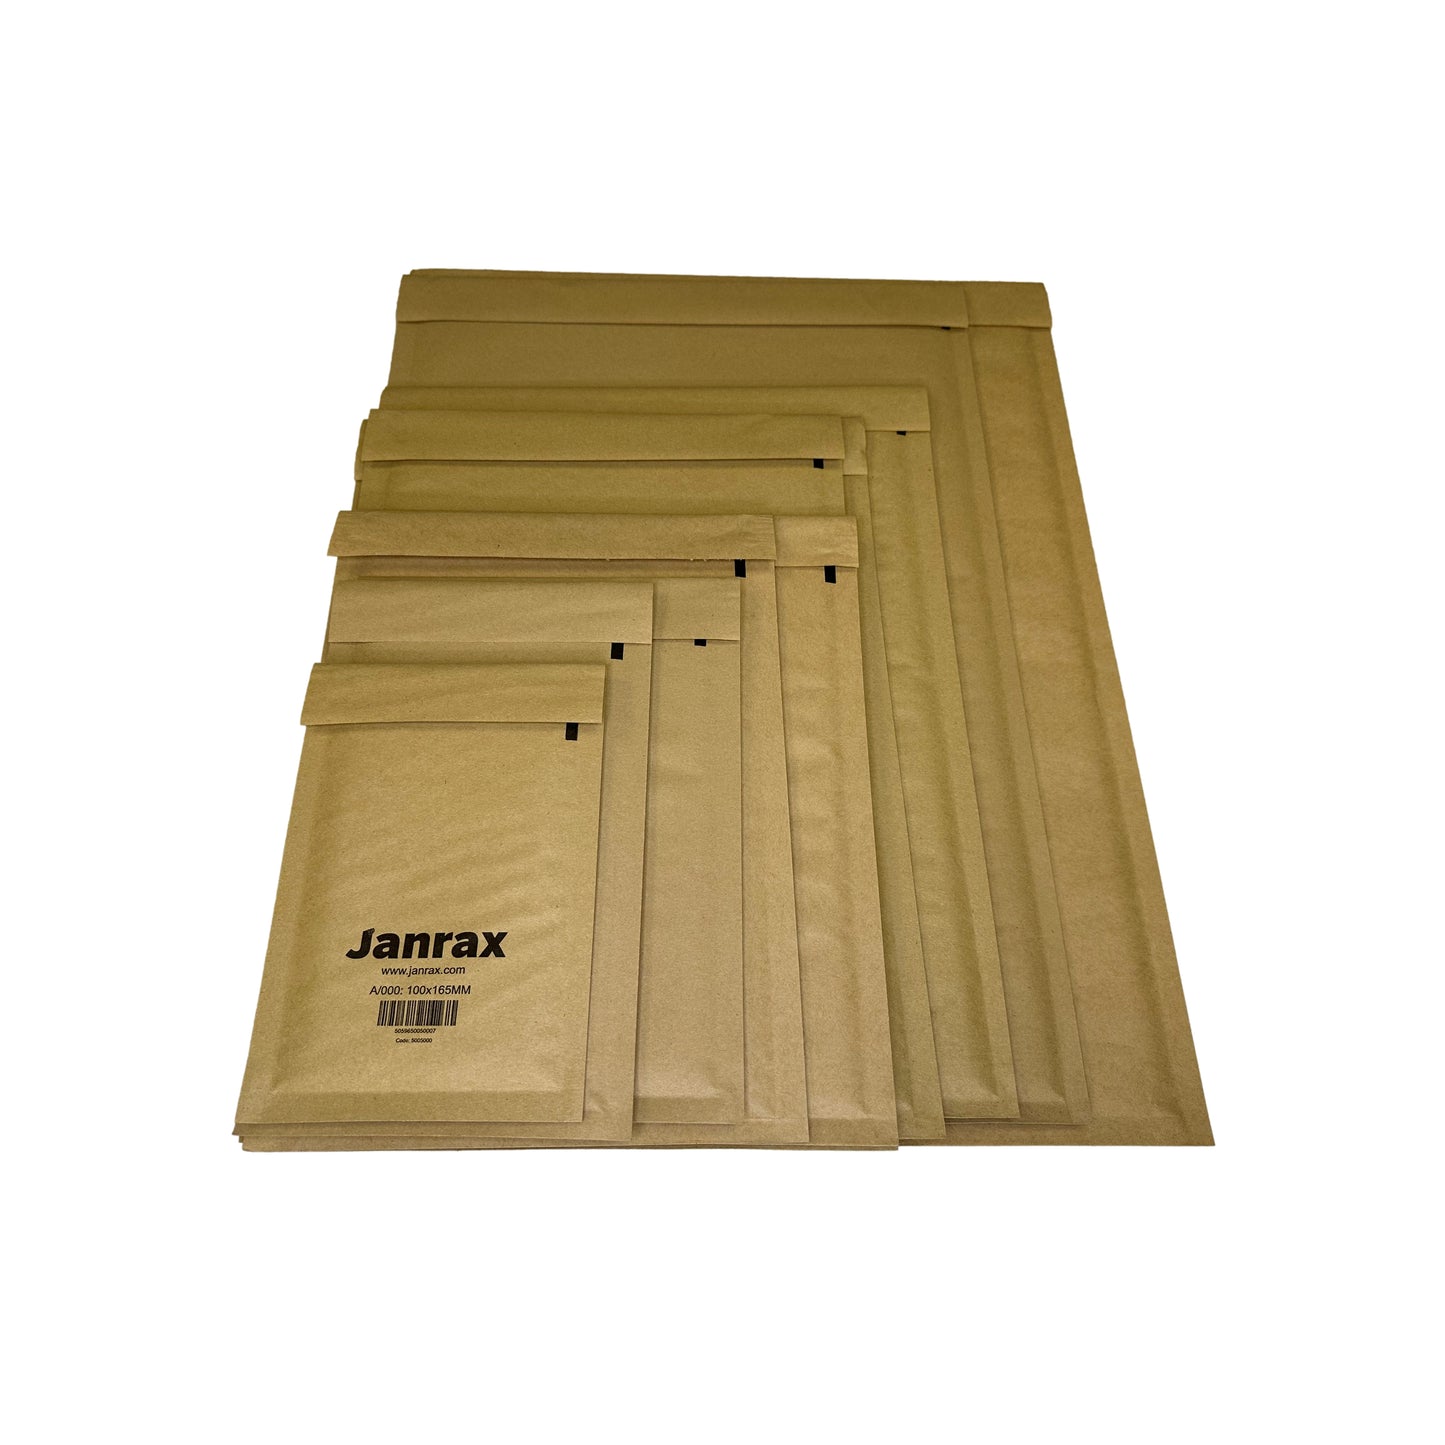 Bubble Lined Size 2/E Padded Brown Postal Envelope by Janrax